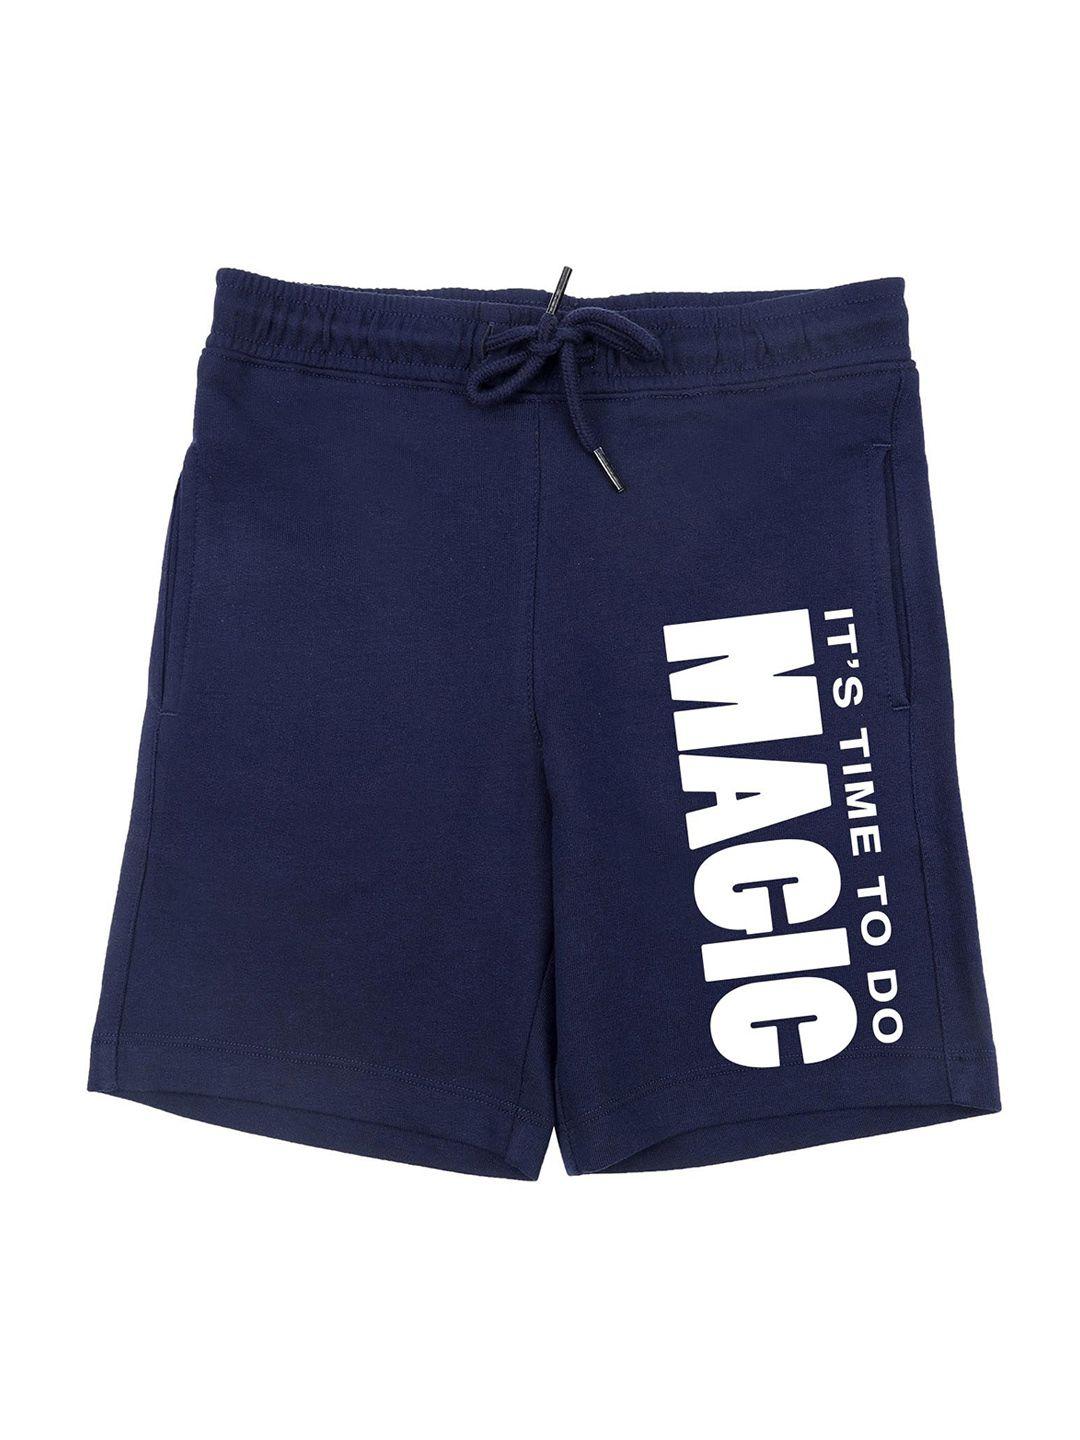 harry-potter-by-wear-your-mind-boys-navy-blue-&-white-harry-potter-printed-shorts